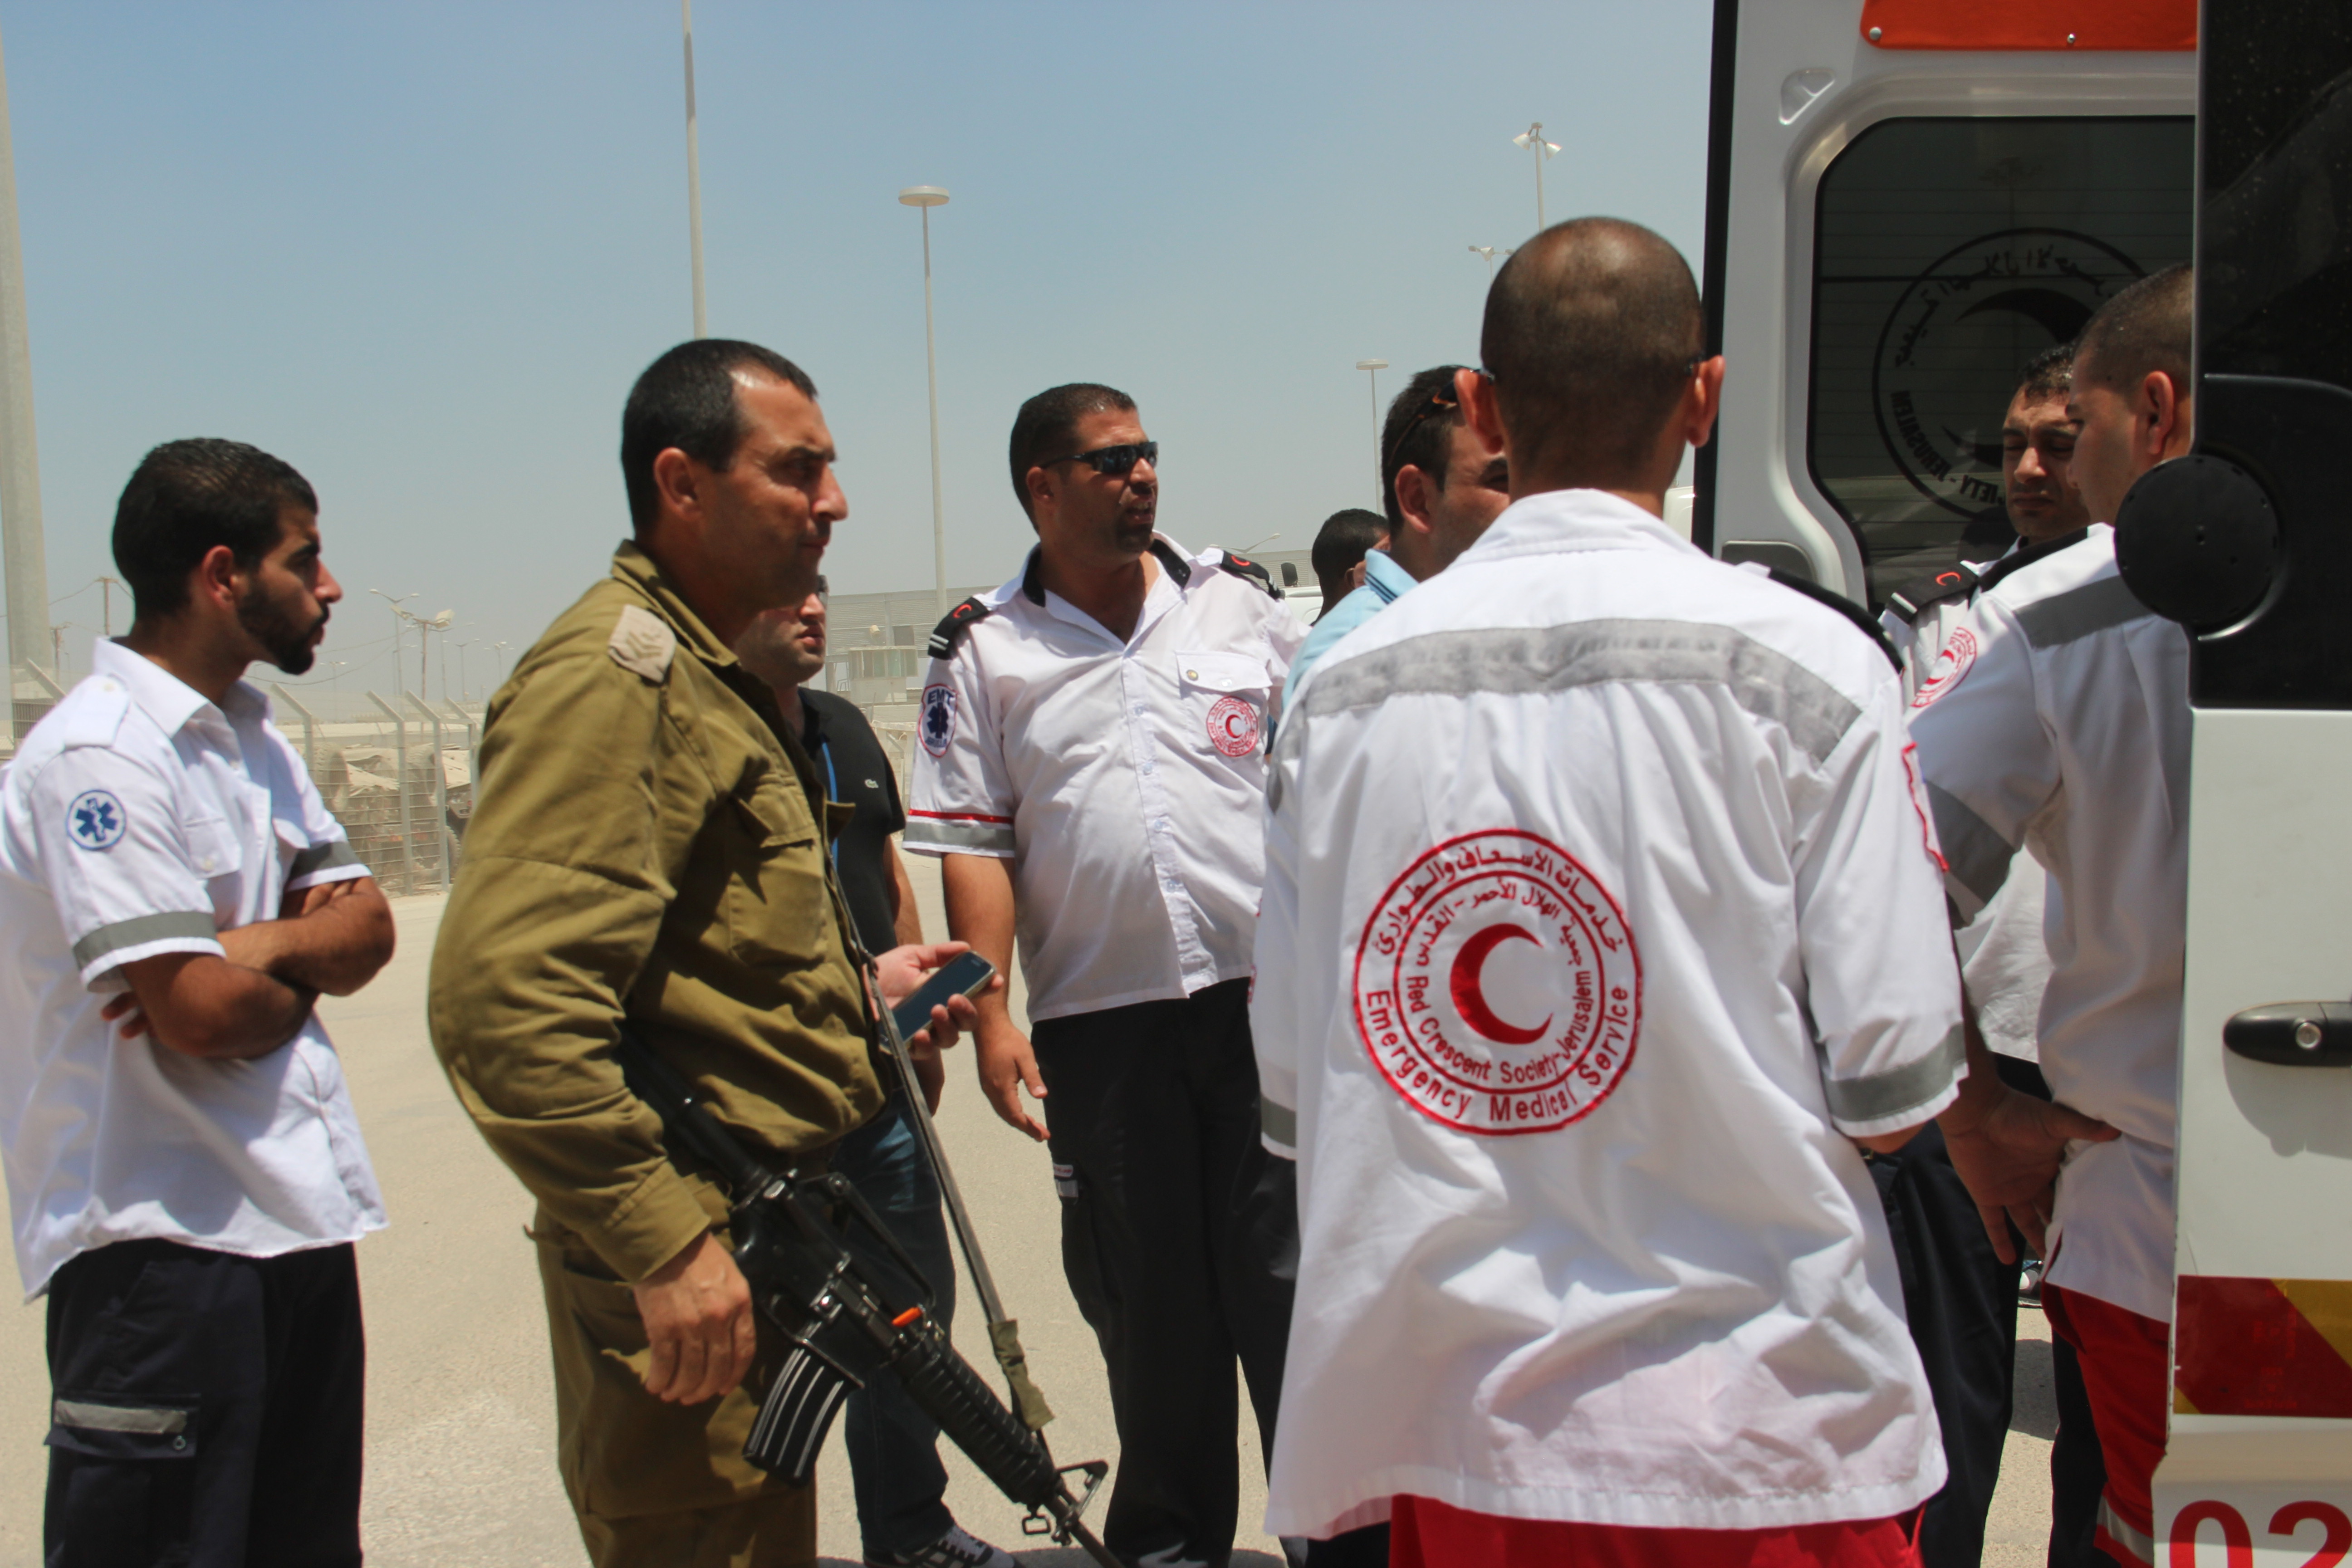 2014 07 29 - Transfer of Palestinian Civilians at Erez Crossing - 3 of 3